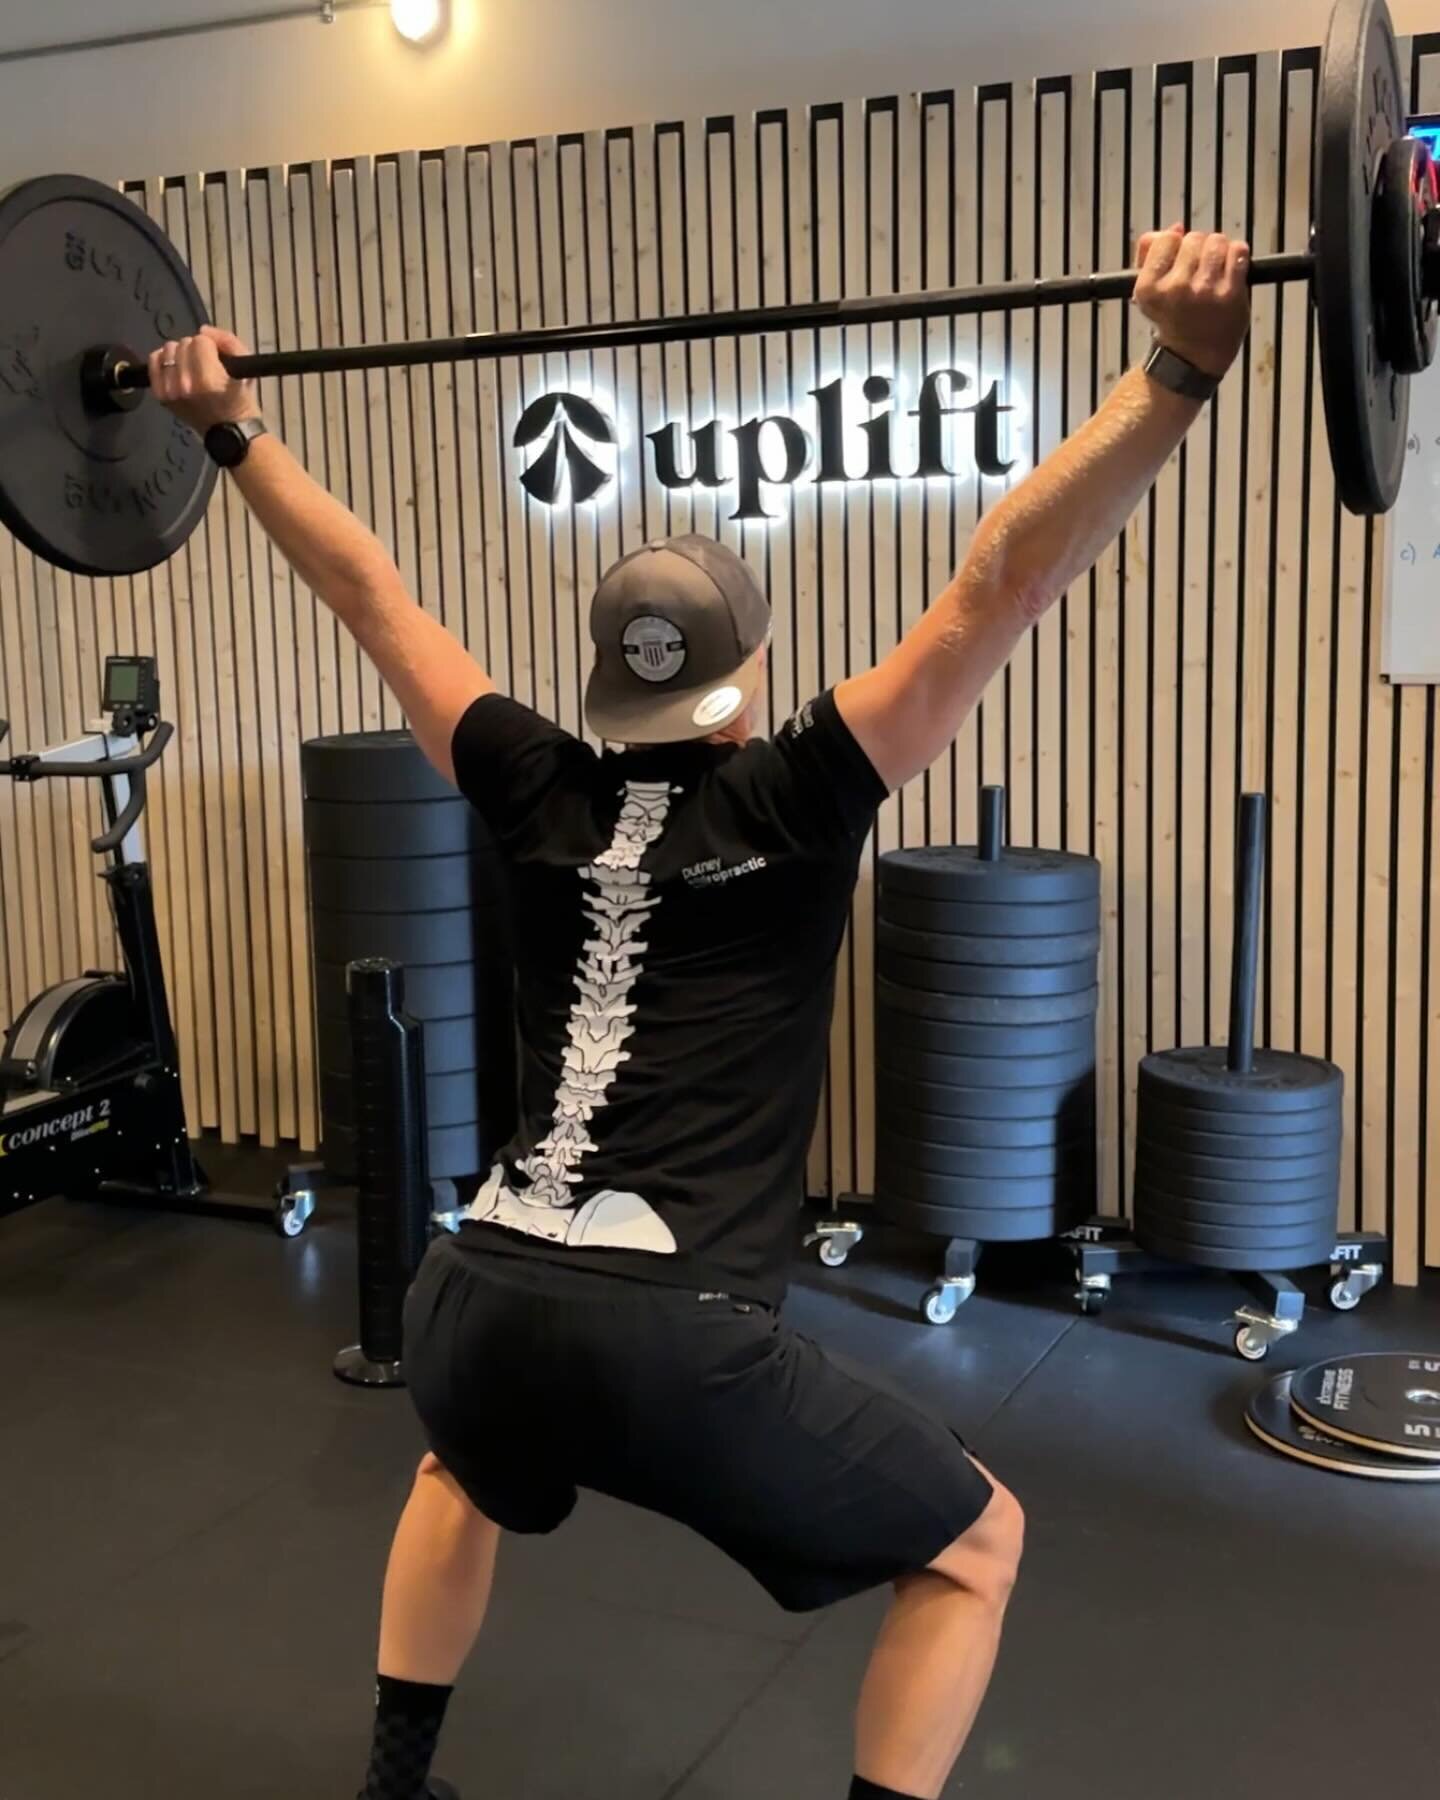 Time to start the winter strength program? @upliftwandsworth is a new PT and group training space we went and paid a visit to. If you want to try a new space to get fit and strong check them out. @scottyconnersfitness is one of their super coaches 💪